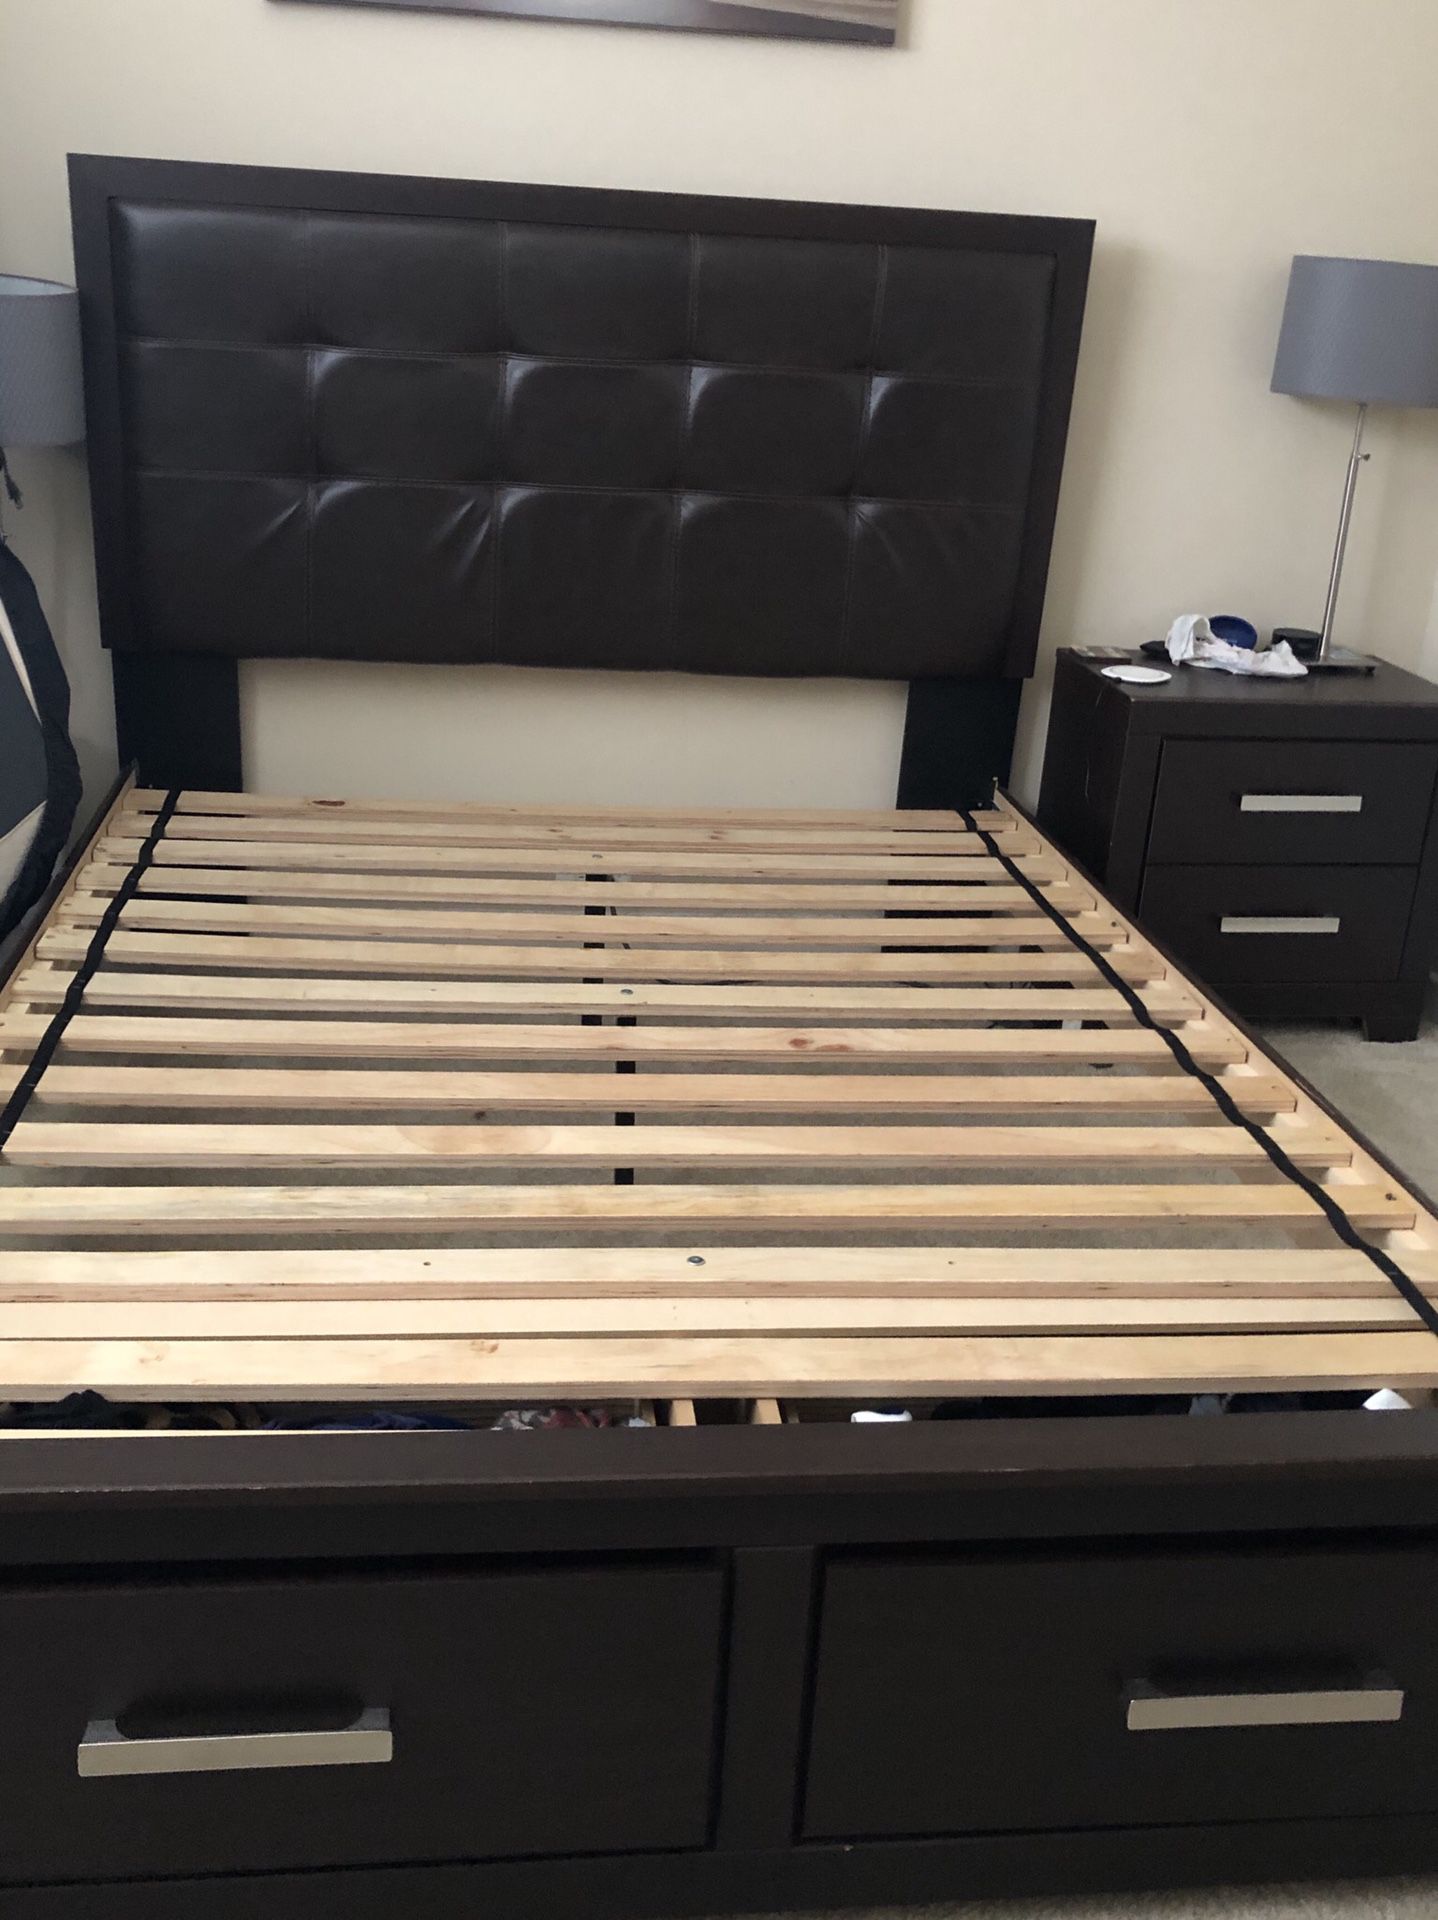 Queen bed set Including headboard, slats back bed drawers